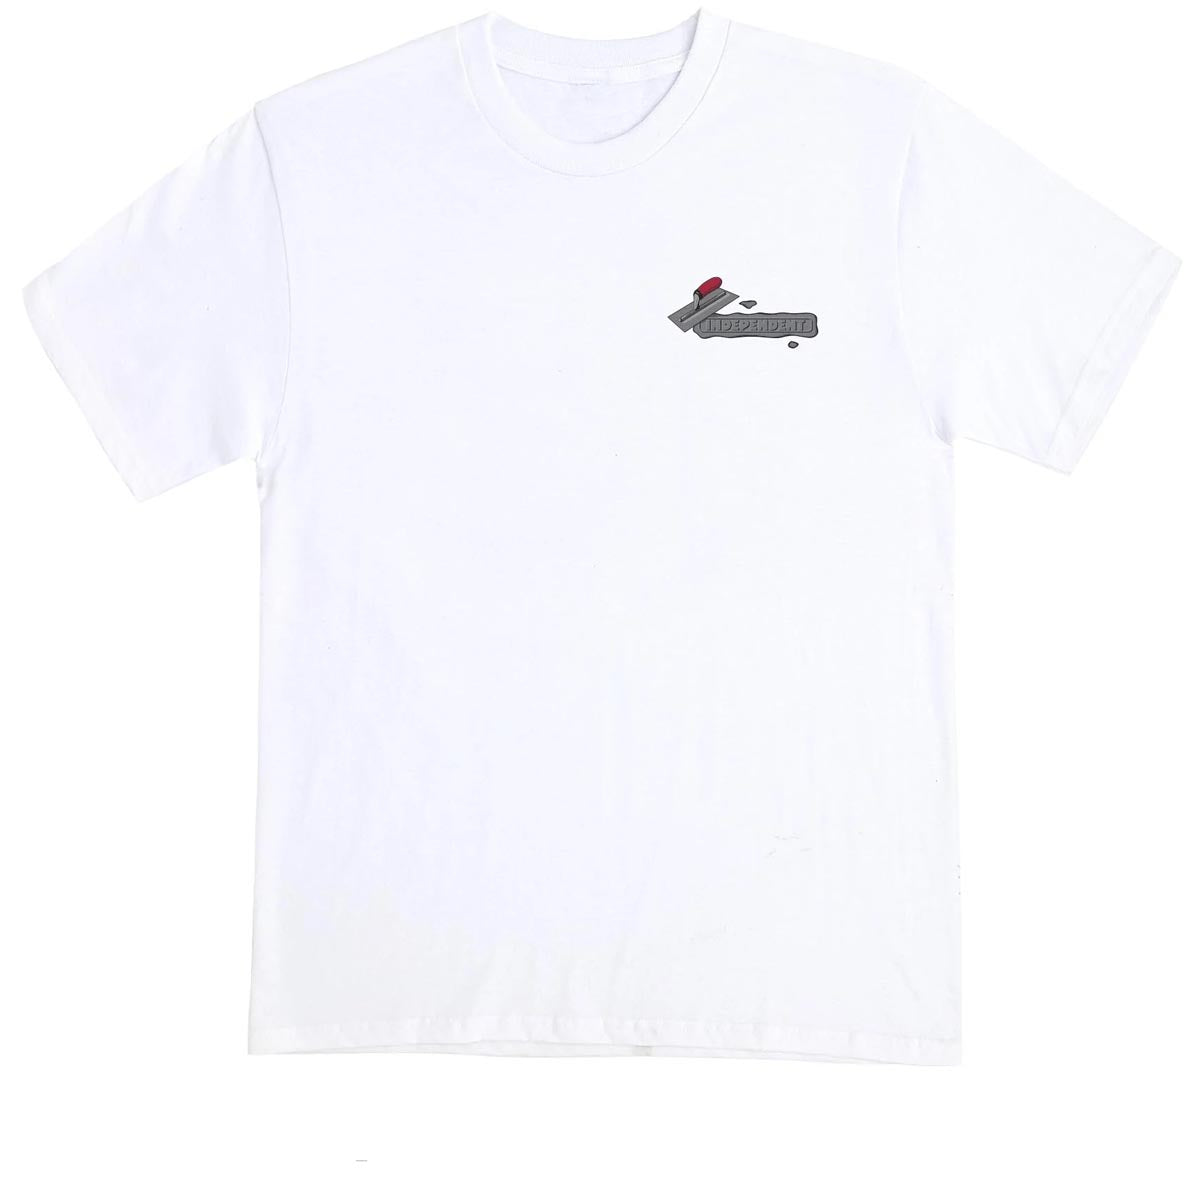 Independent Paving The Way T-Shirt - White image 2